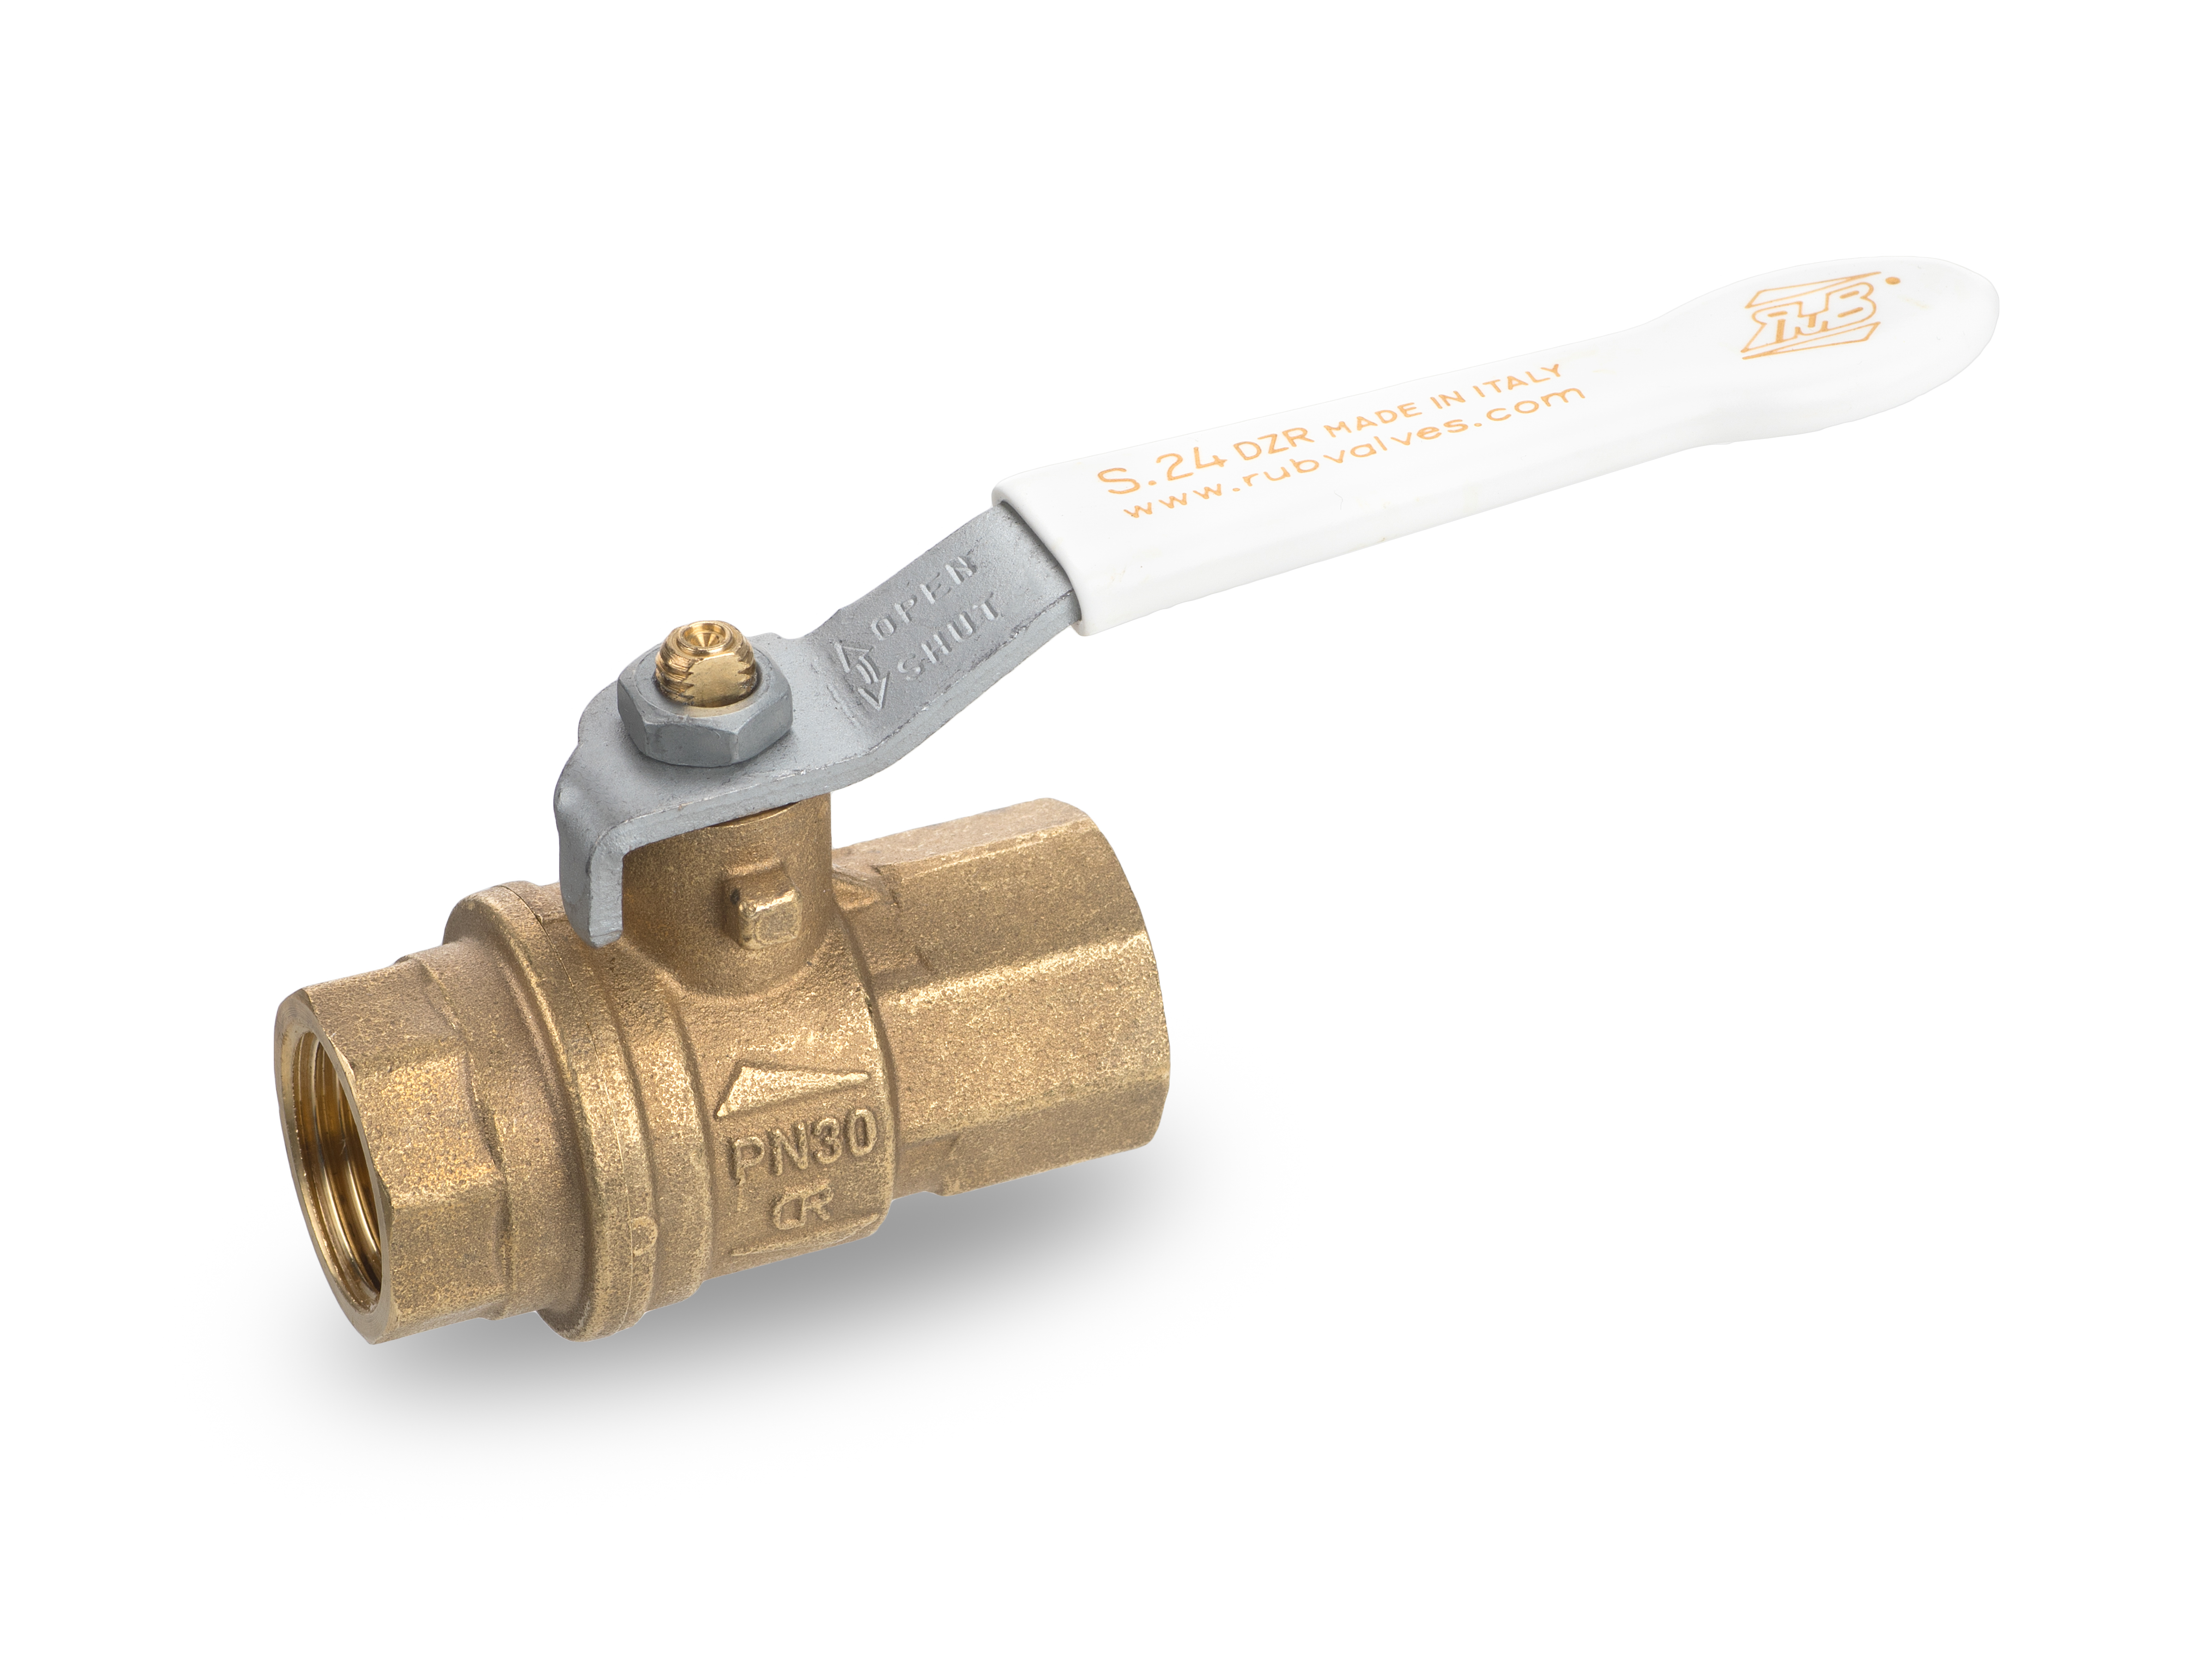 Insulated Lever Handle 1/2" BSP Male to Male Brass Ball Valve Full Port 